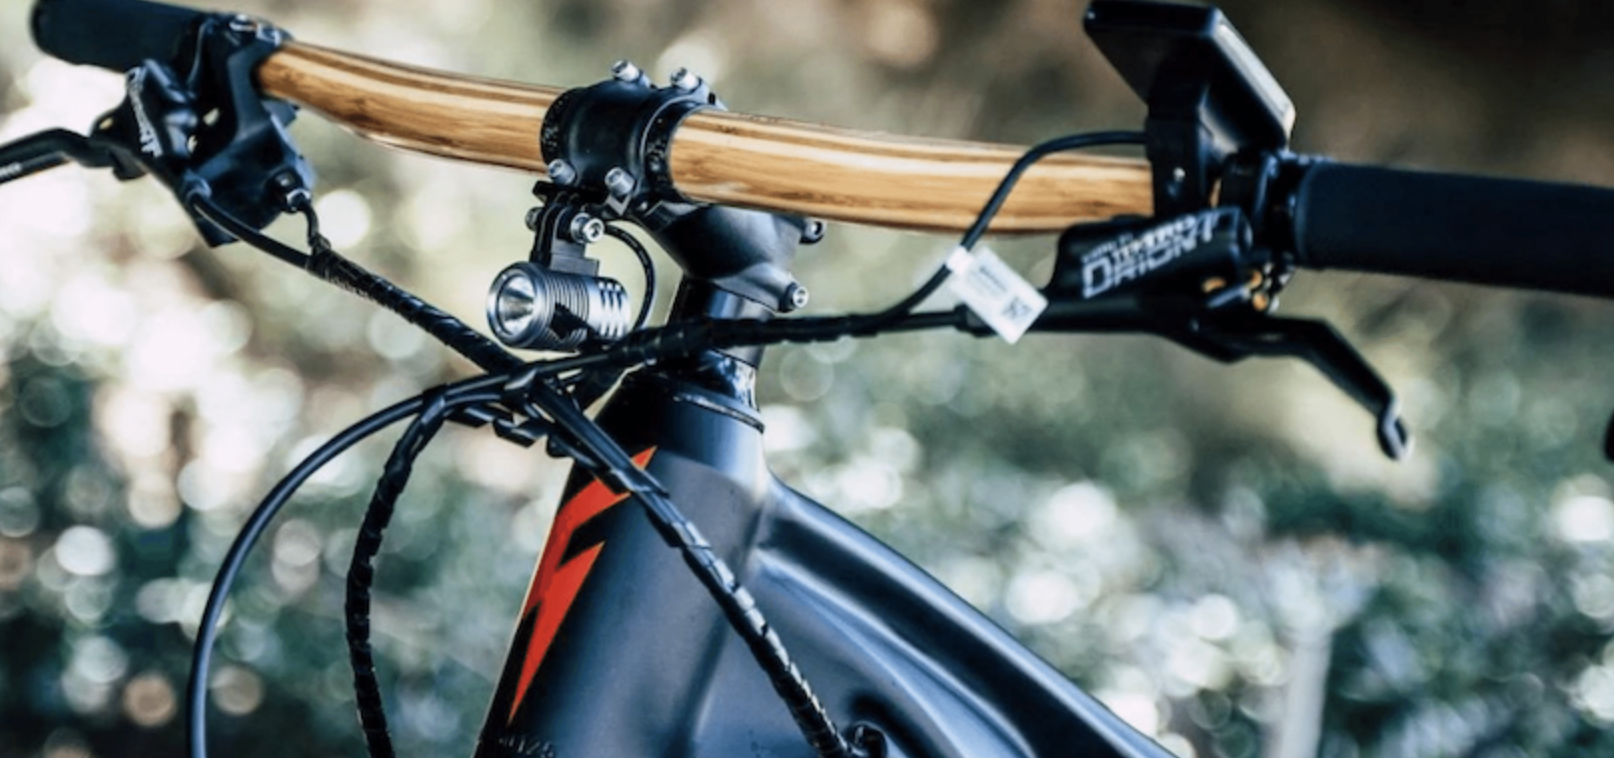 Sustainable bicycles made from bamboo help change lives – Viable Earth